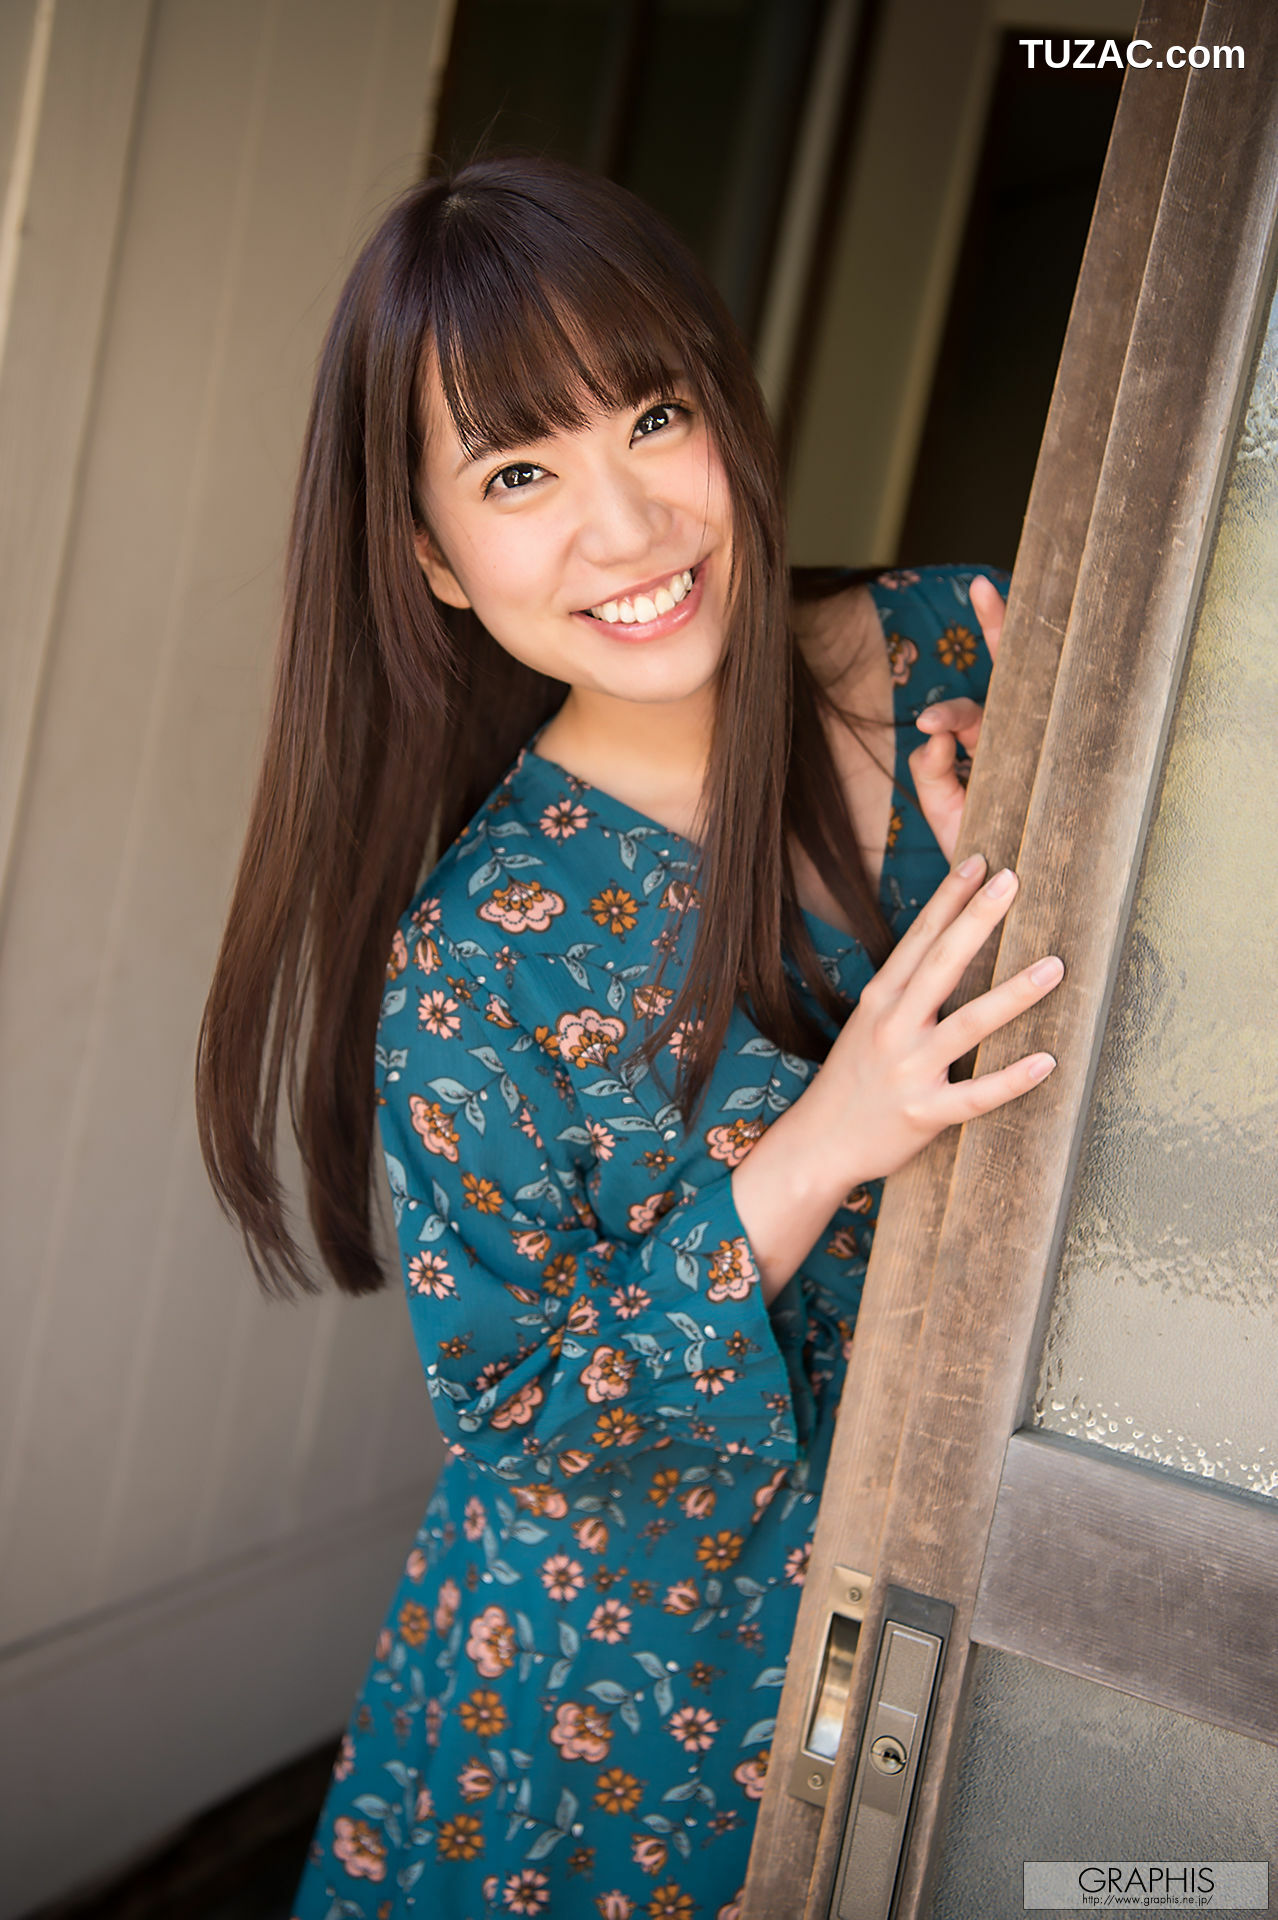 Graphis_初美りん/初美铃《Look at me!》 Gals 写真集[62P]